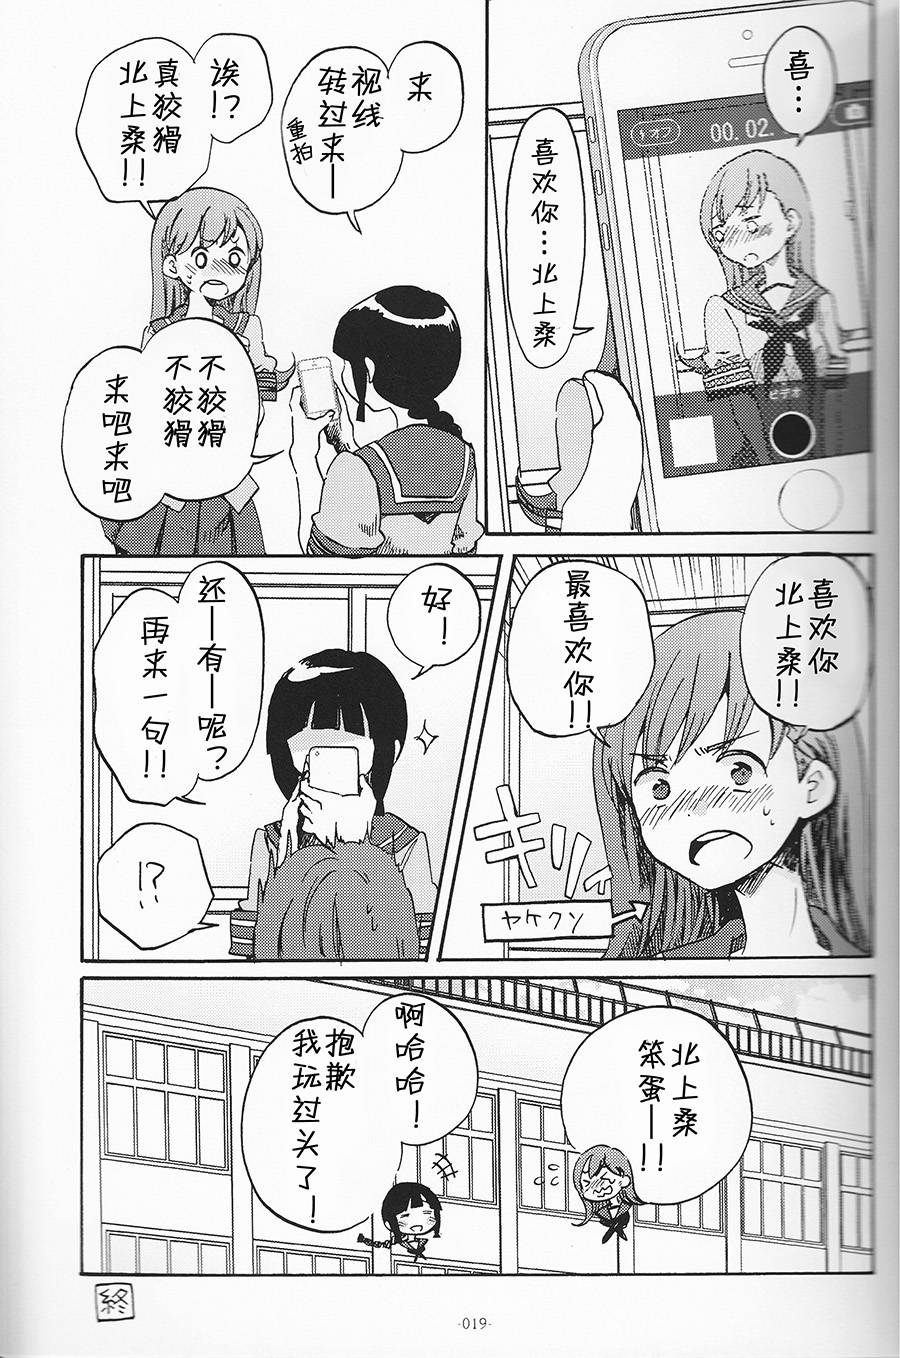 【t pases on good terms every day】漫画-（全一话）章节漫画下拉式图片-13.jpg